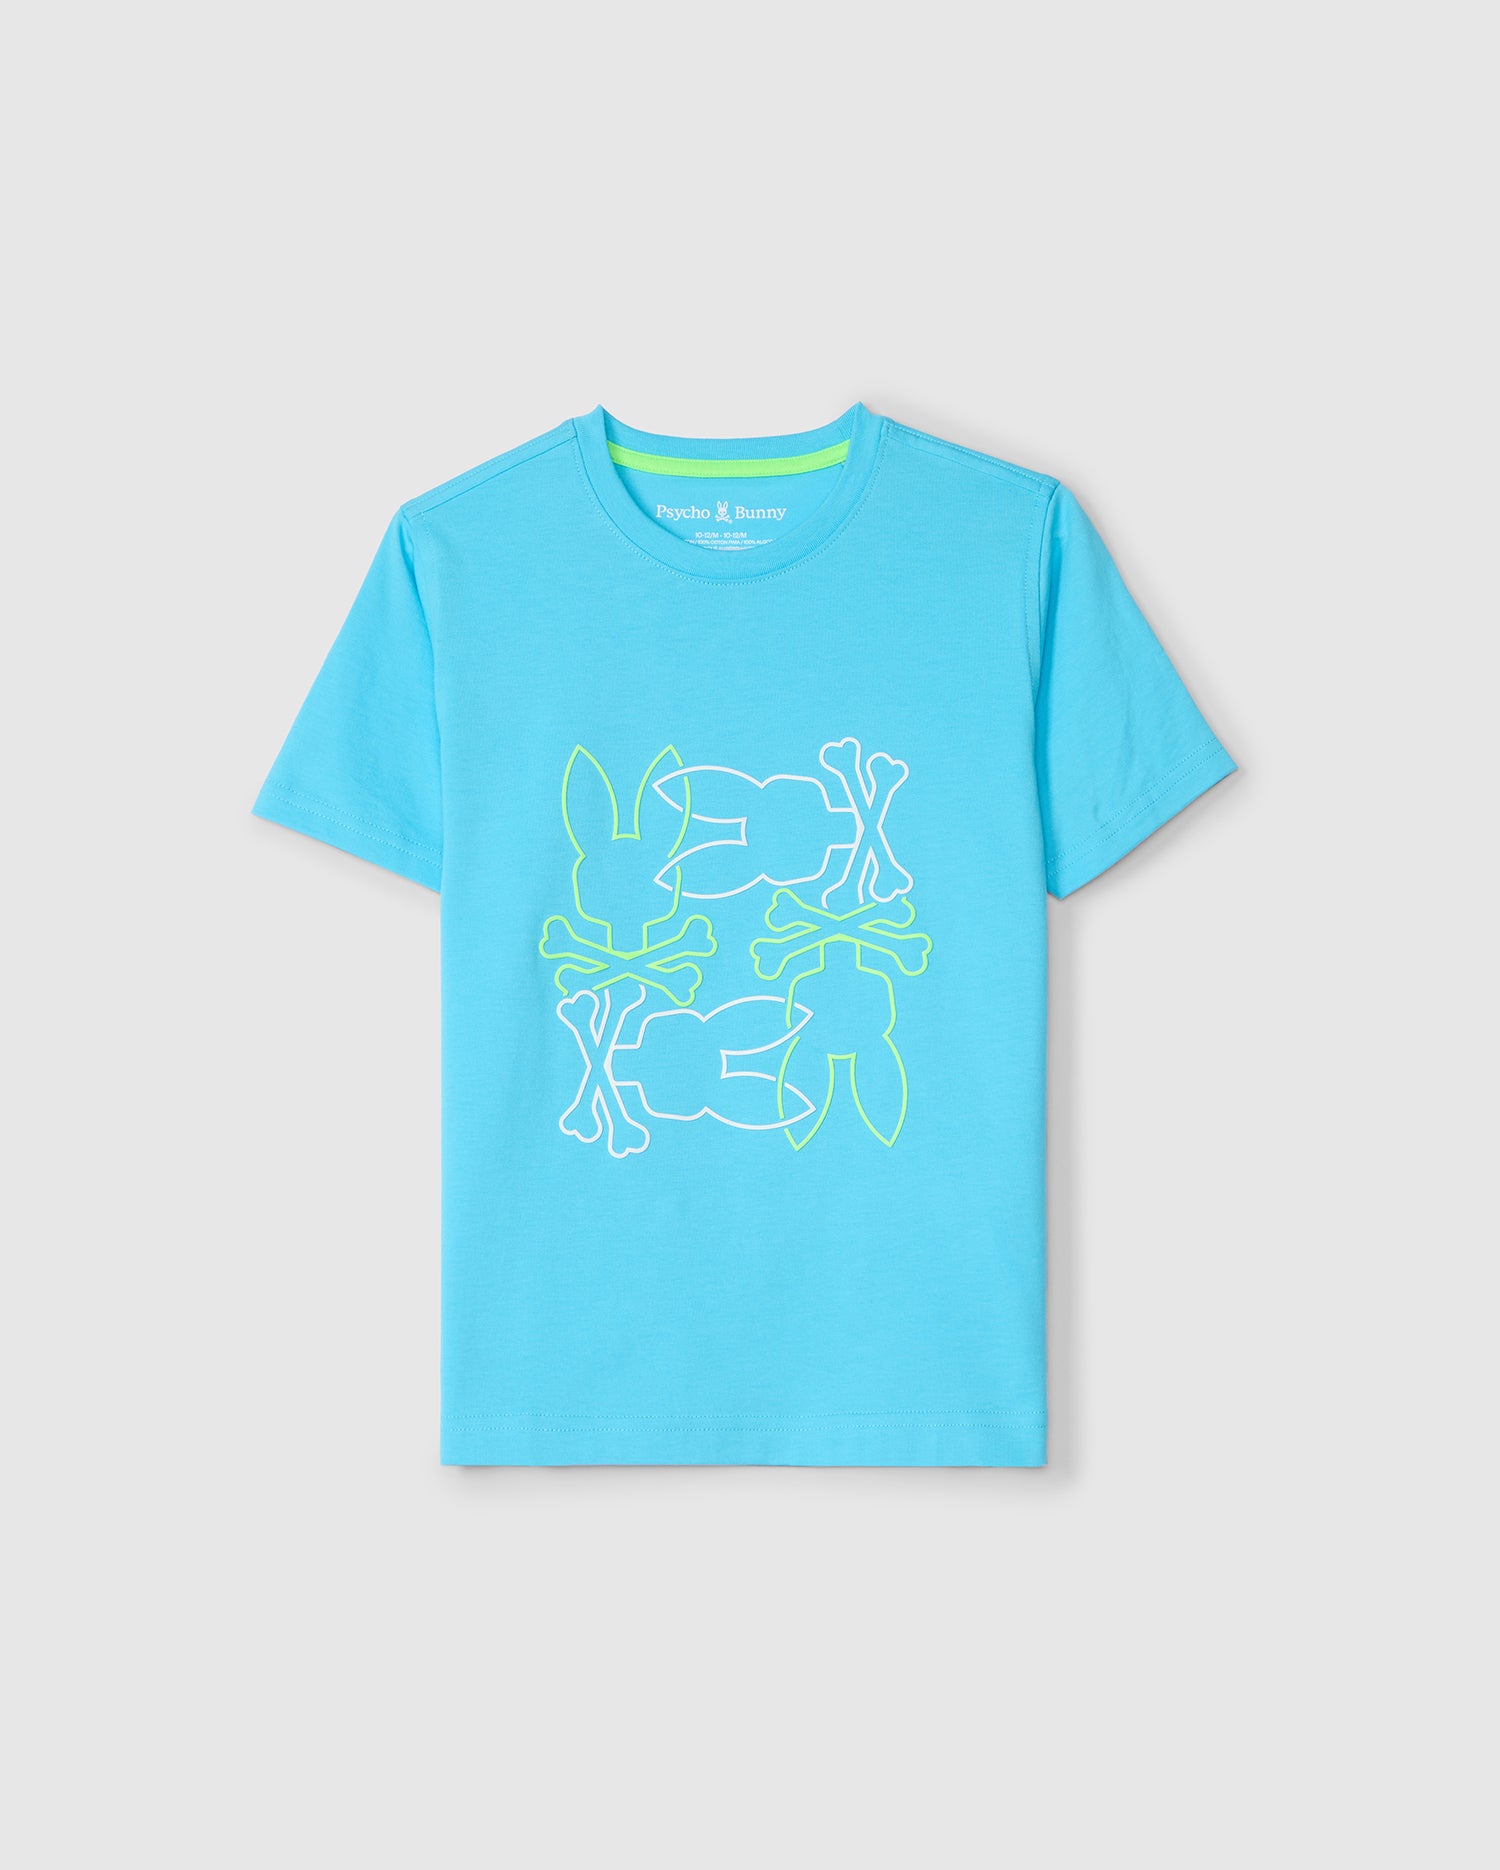 A light blue KIDS RODMAN GRAPHIC TEE displayed flat with an HD-printed interlocking Bunny design in neon green at the center. The design is modern and simplistic. Brand: Psycho Bunny.